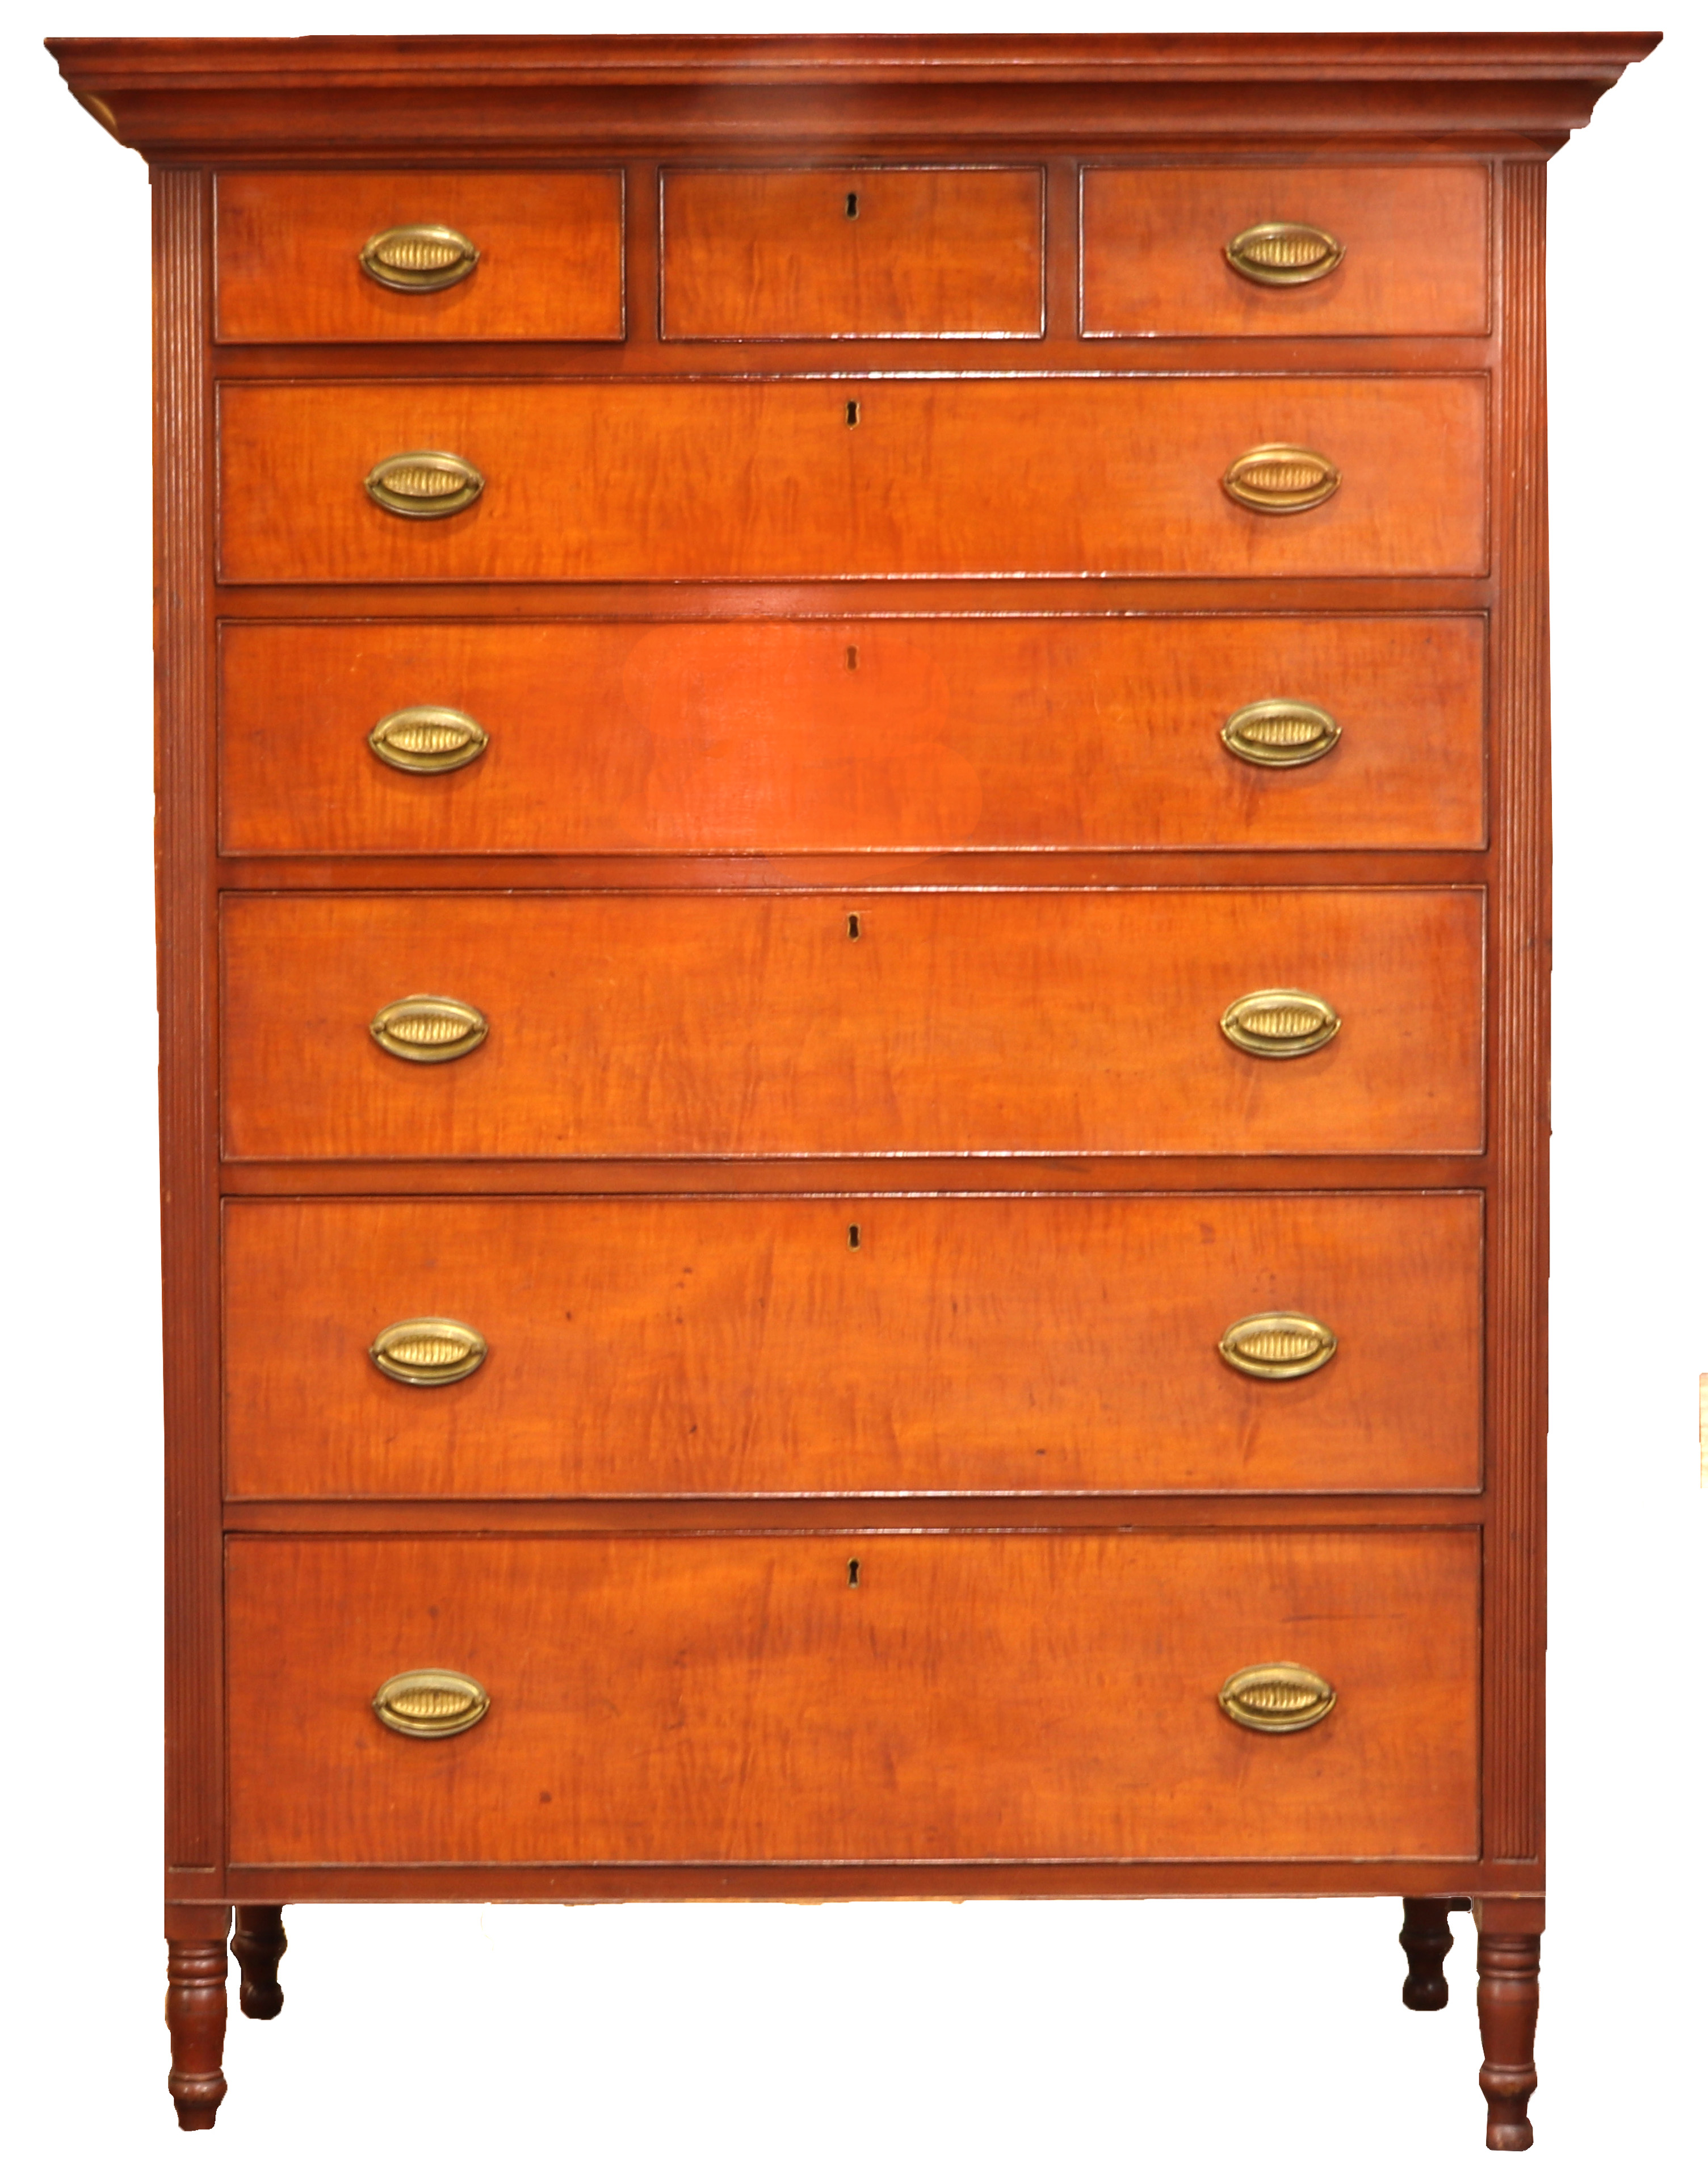 An American Federal cherry chest of drawers